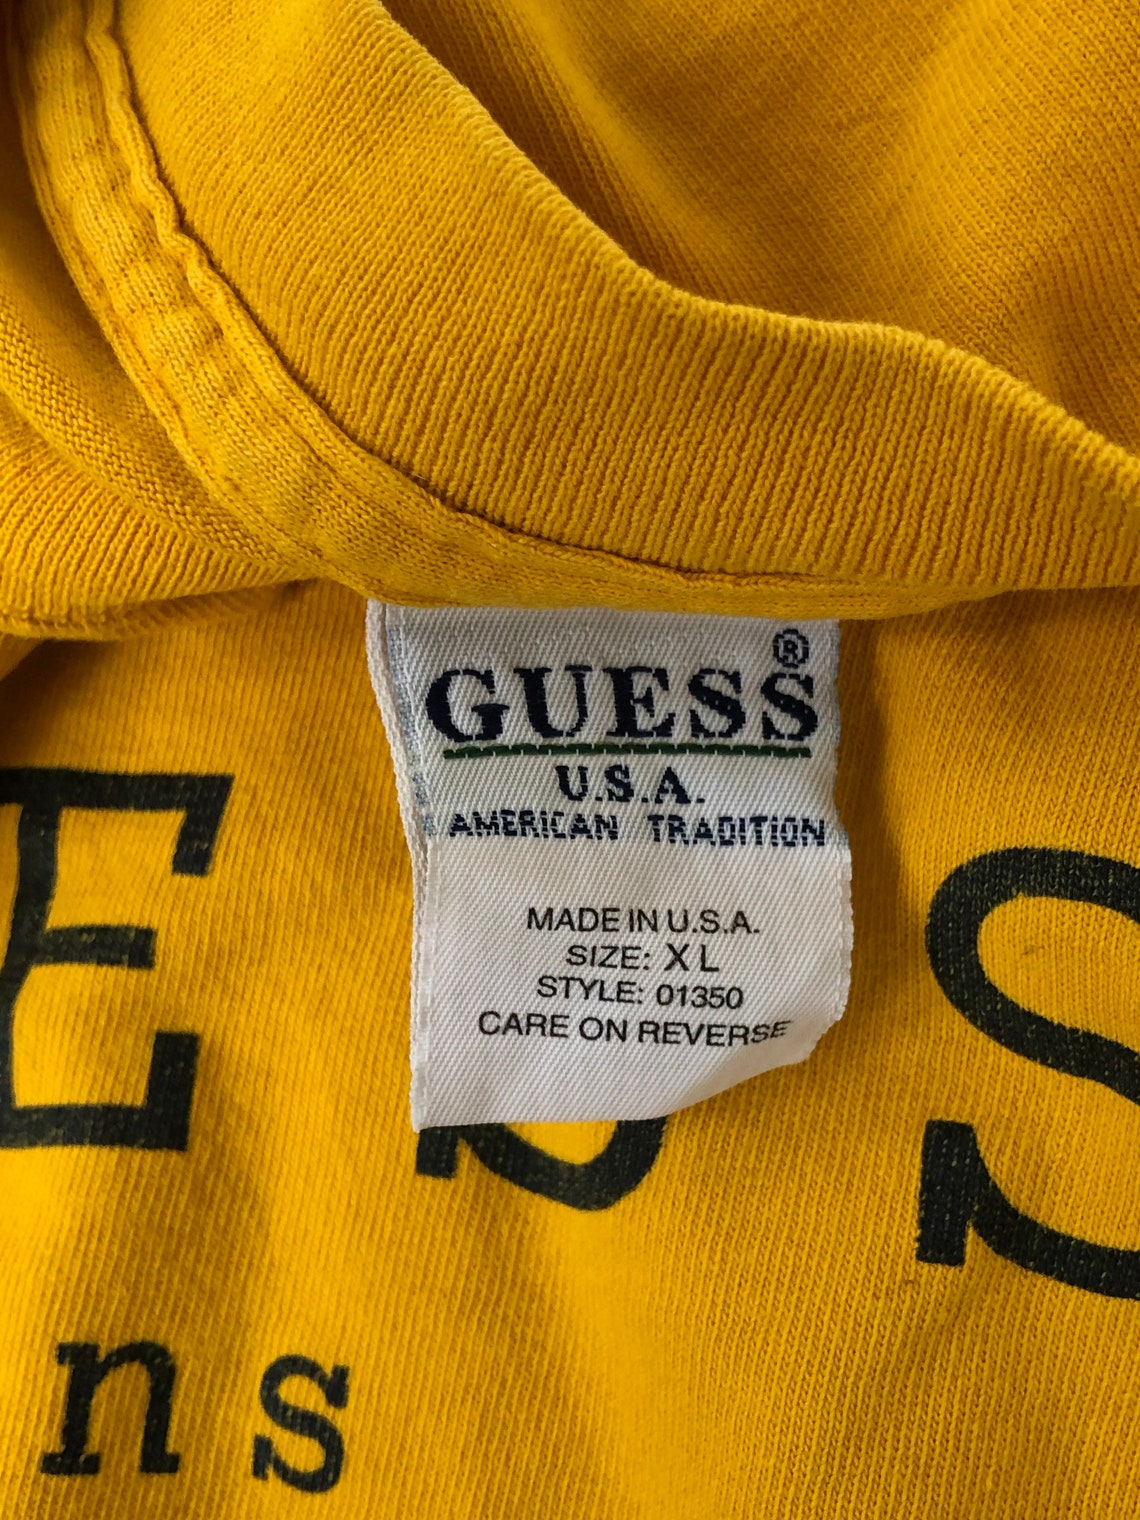 Vintage Guess jeans tee shirt XL | Etsy